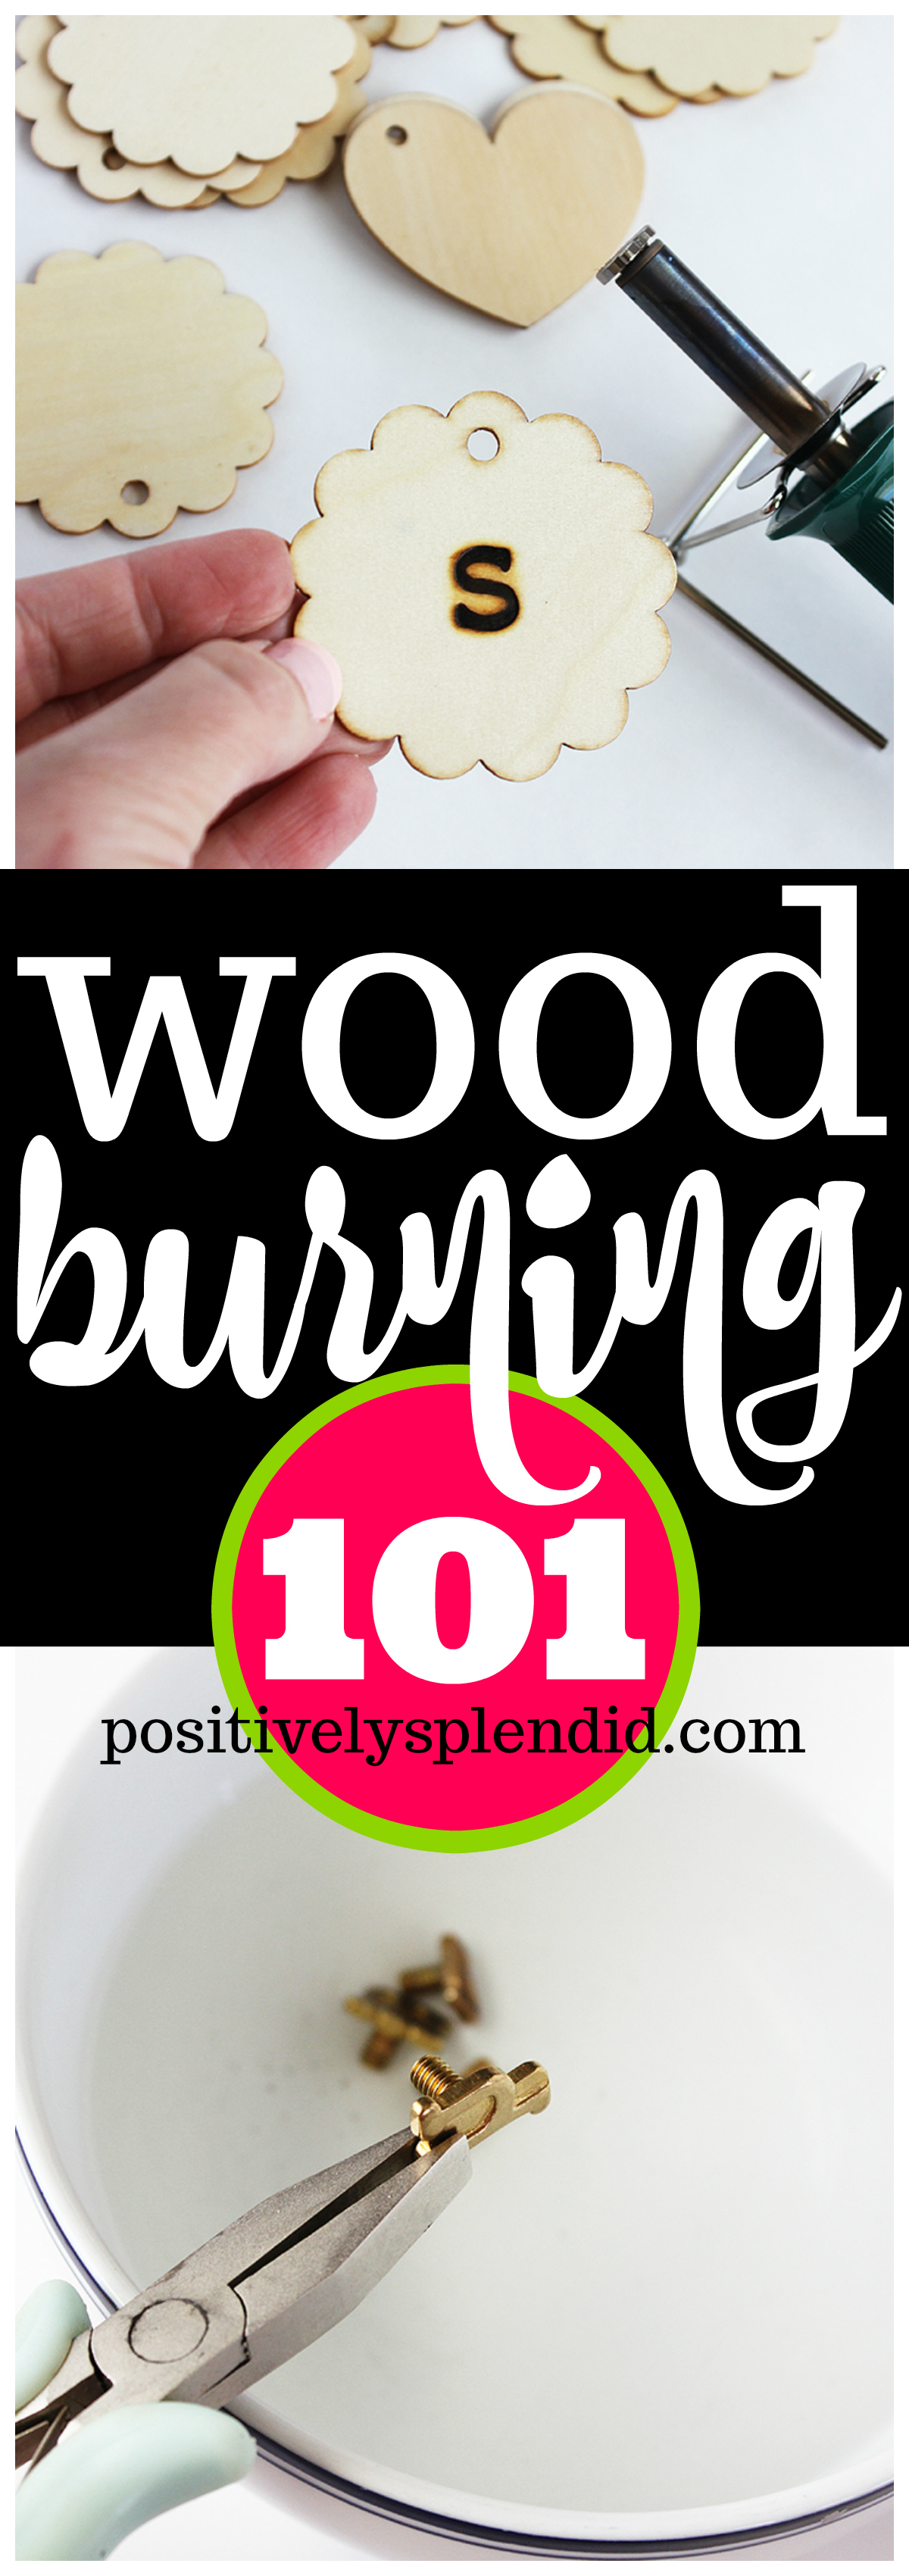 10 Wood Burning Tips and Tricks for Beginners - Positively